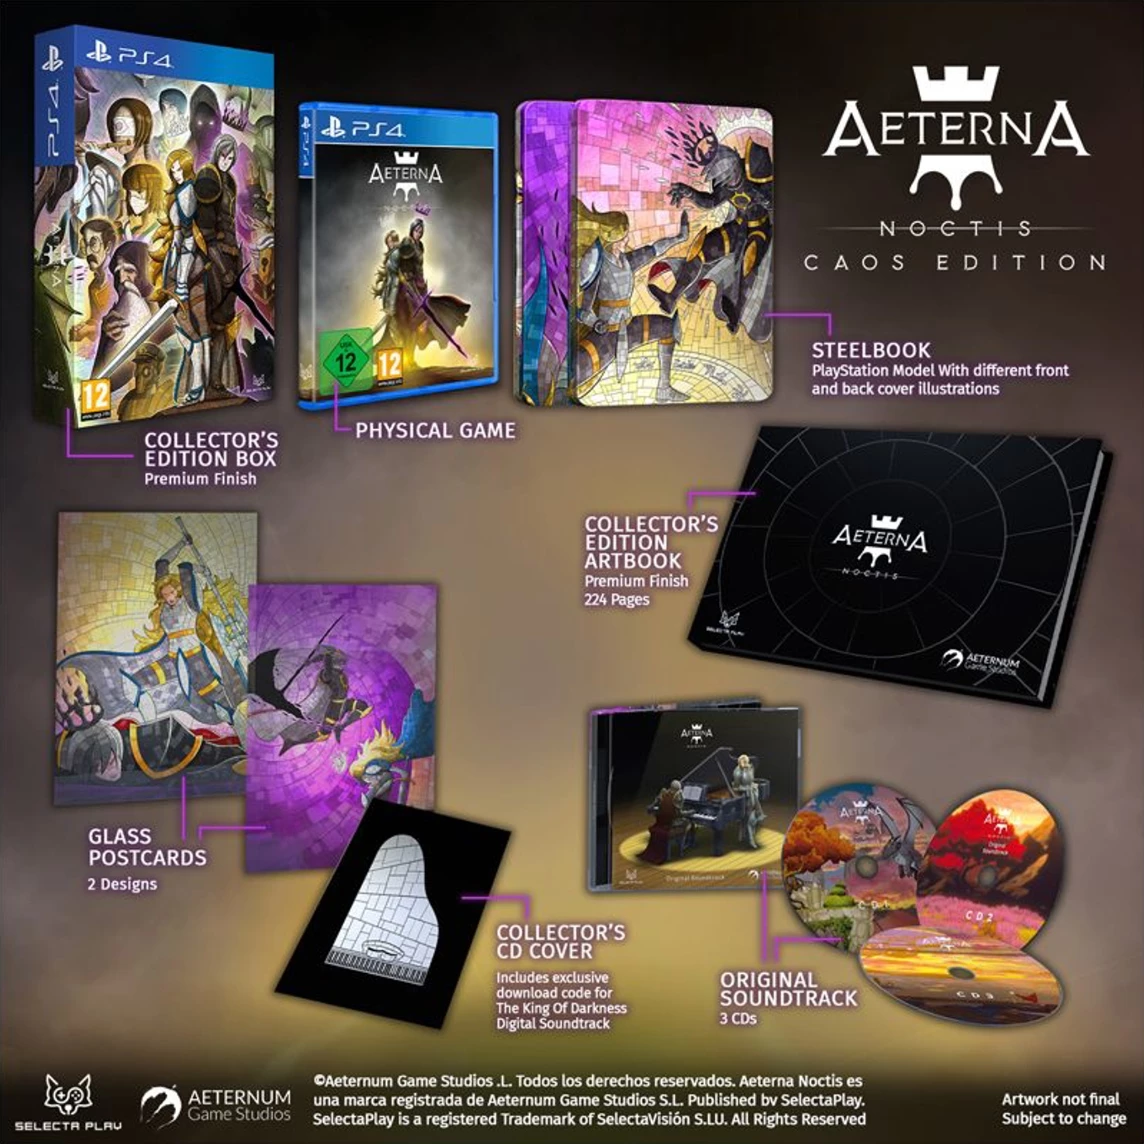 Aeterna Noctis - Caos Edition (PS4), Selecta Play 